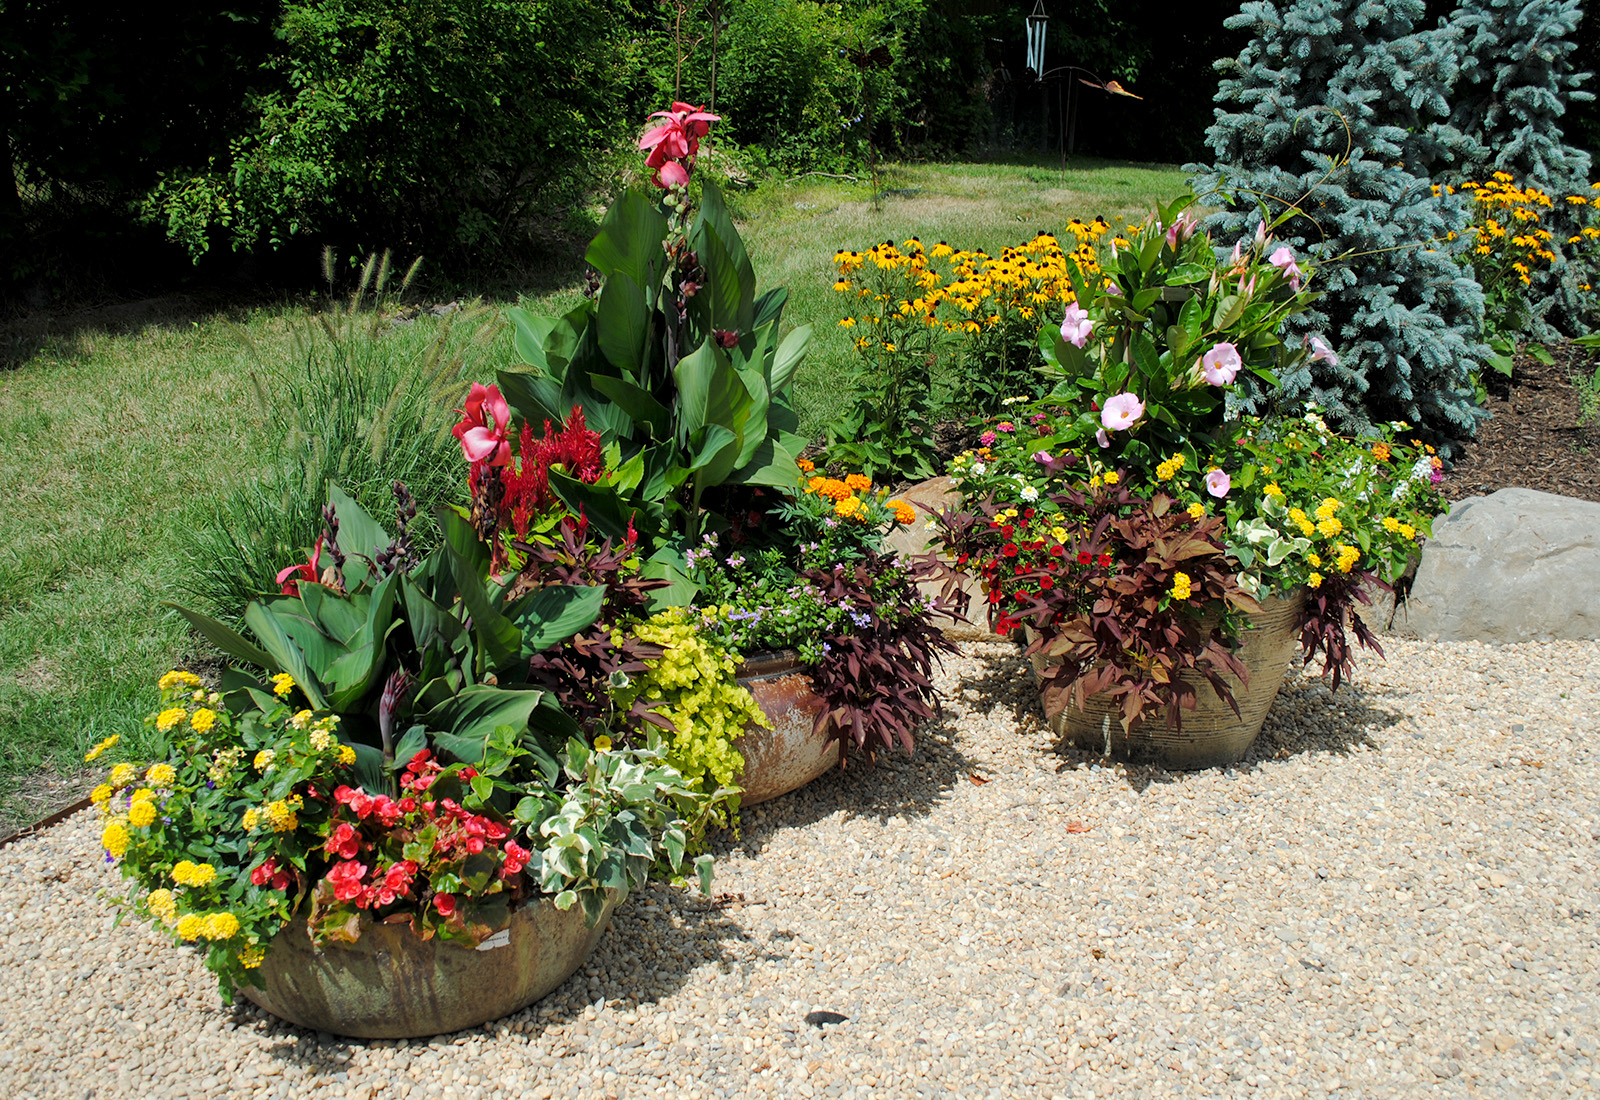 Summer flowering mixed patio planters.